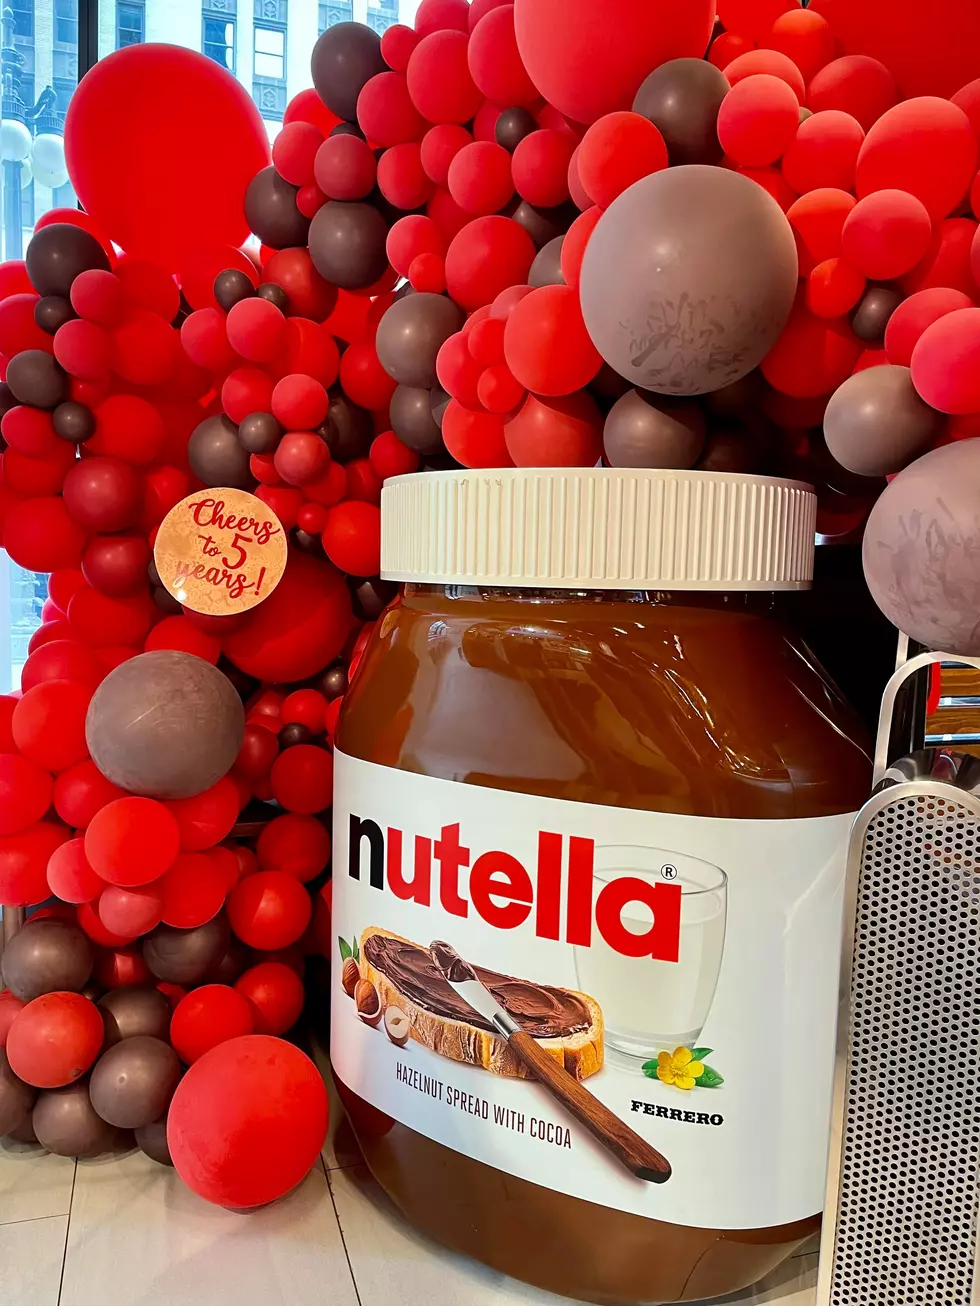 A Fun Look Inside the Nutella Cafe in Chicago [Photos]